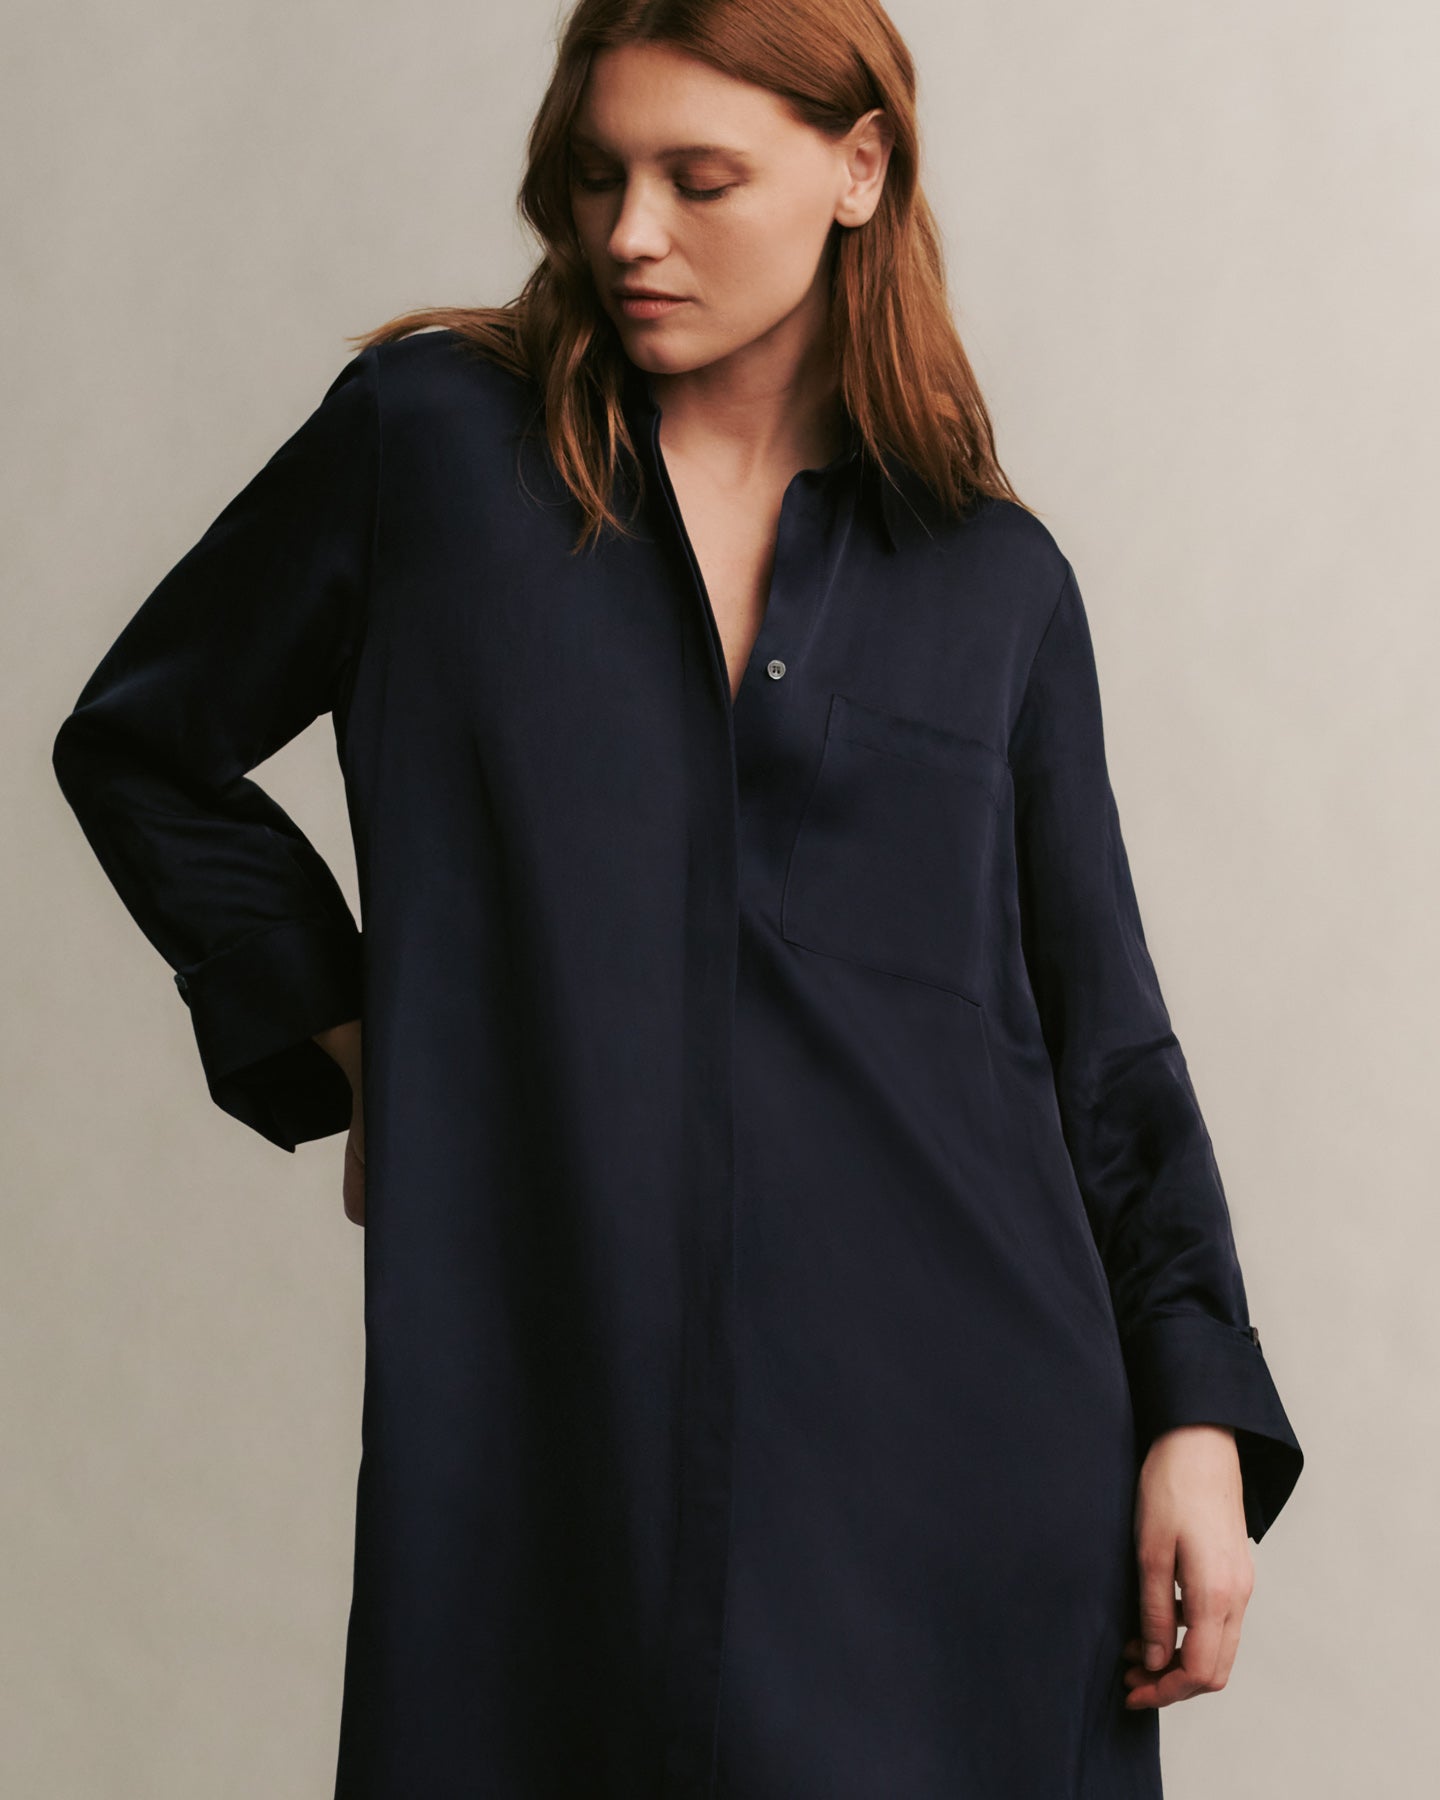 TWP Midnight Jenny's Gown in coated viscose linen view 5